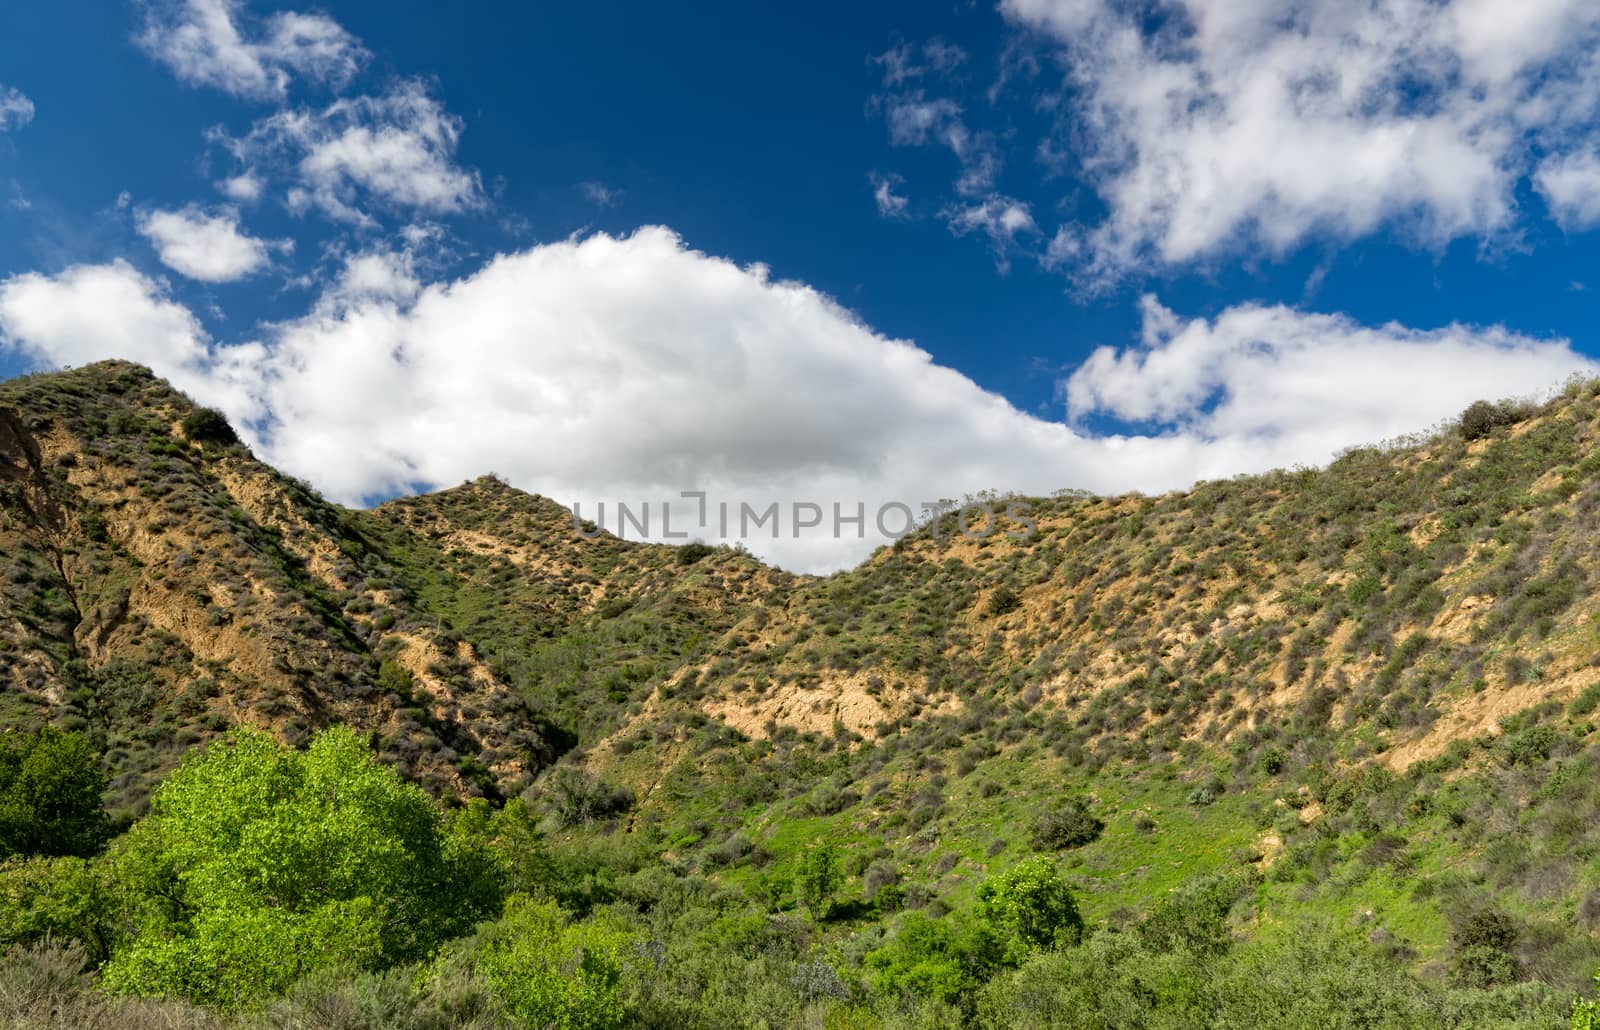 Majestic Towsley Canyon in Newhall, California near Los Angeles.